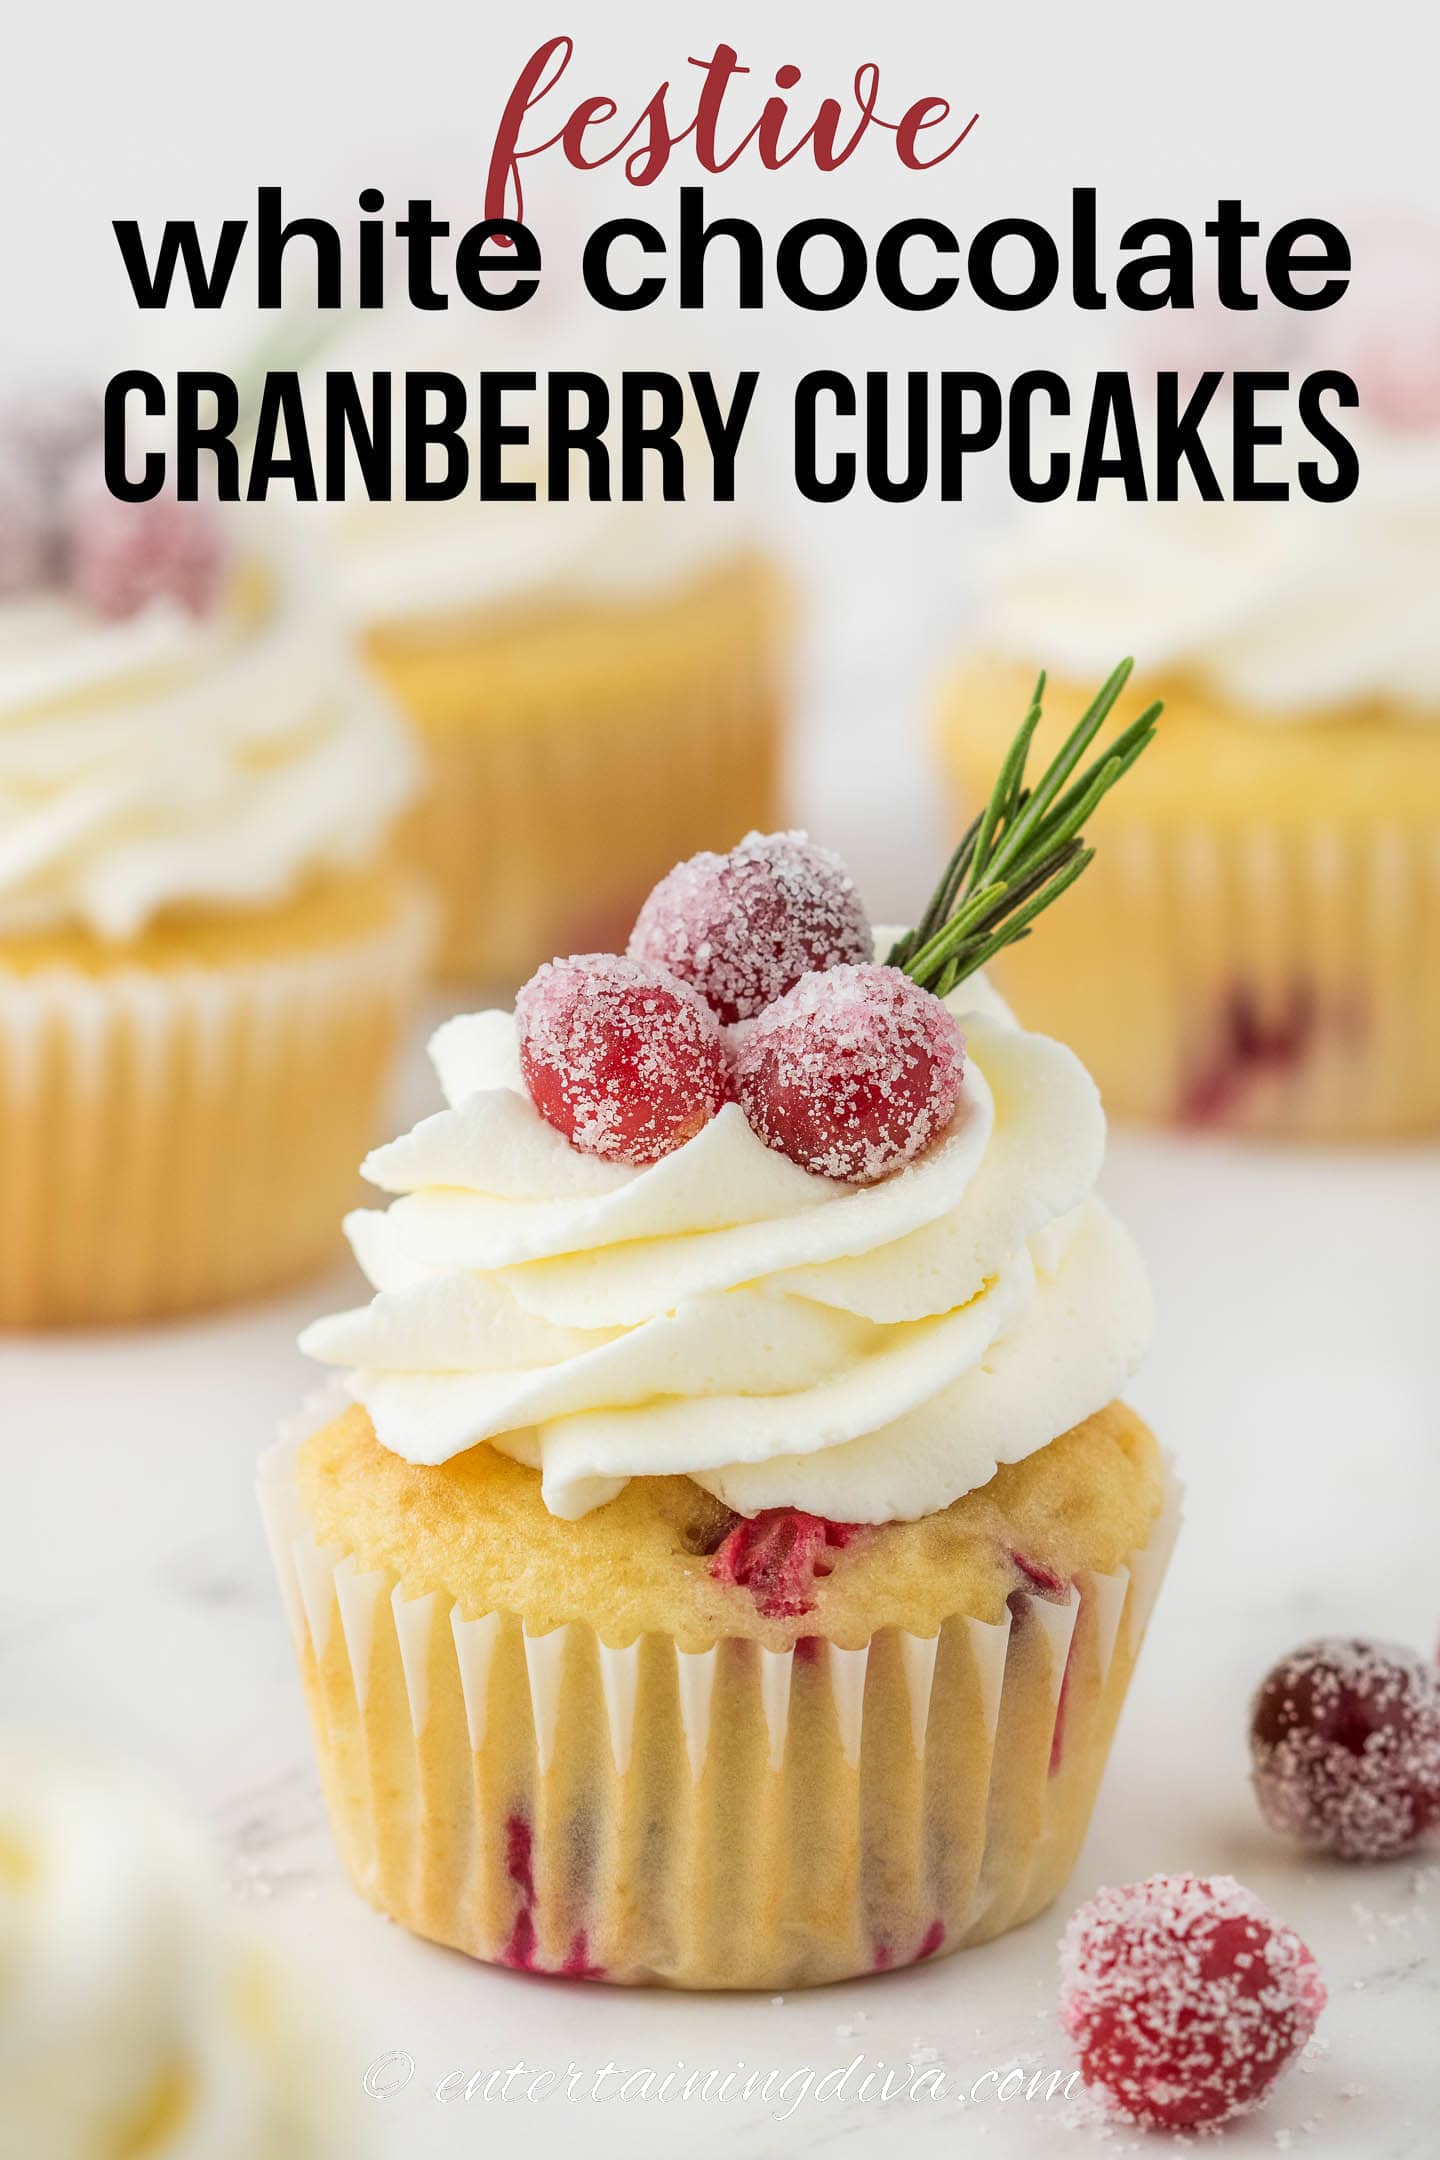 white chocolate cranberry cupcakes with sugared cranberries and rosemary garnish